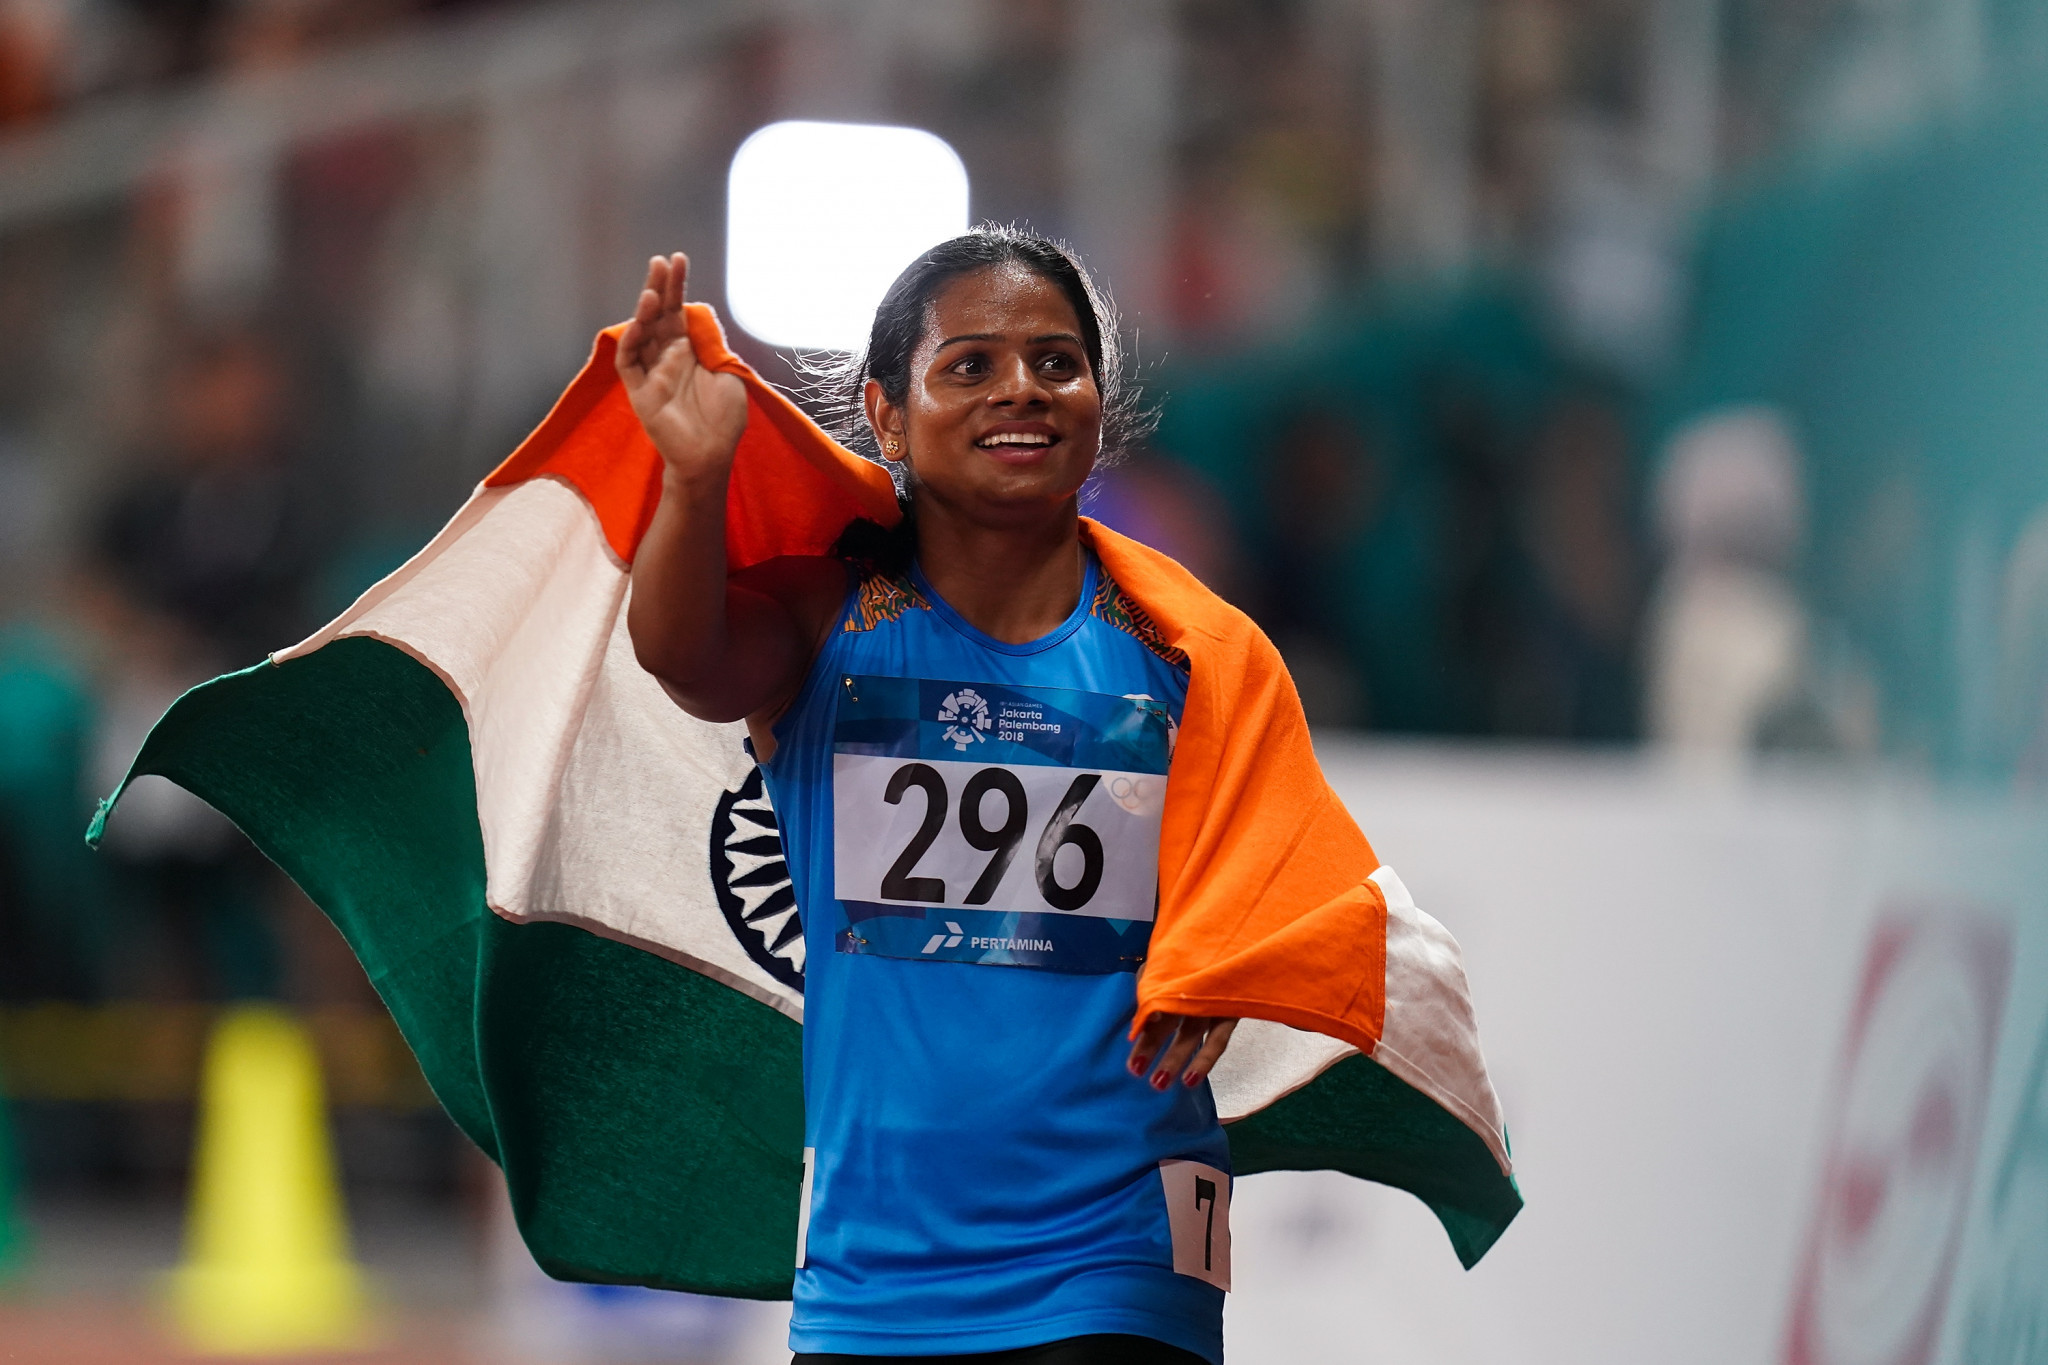 Dutee Chand was among the members of India's relay team set to compete ©Getty Images